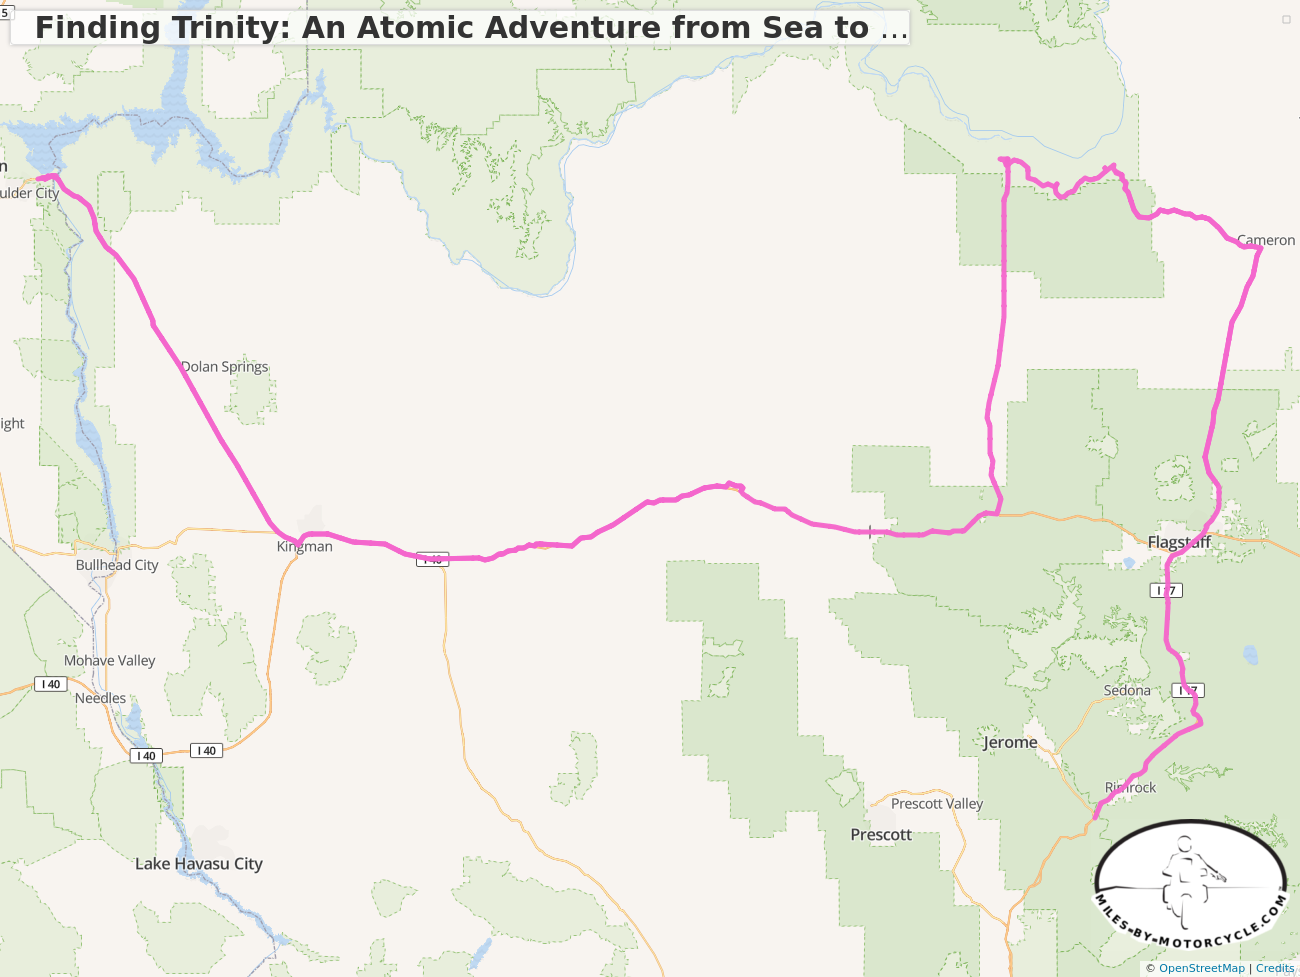 Finding Trinity: An Atomic Adventure from Sea to Glowing Sea Day 10